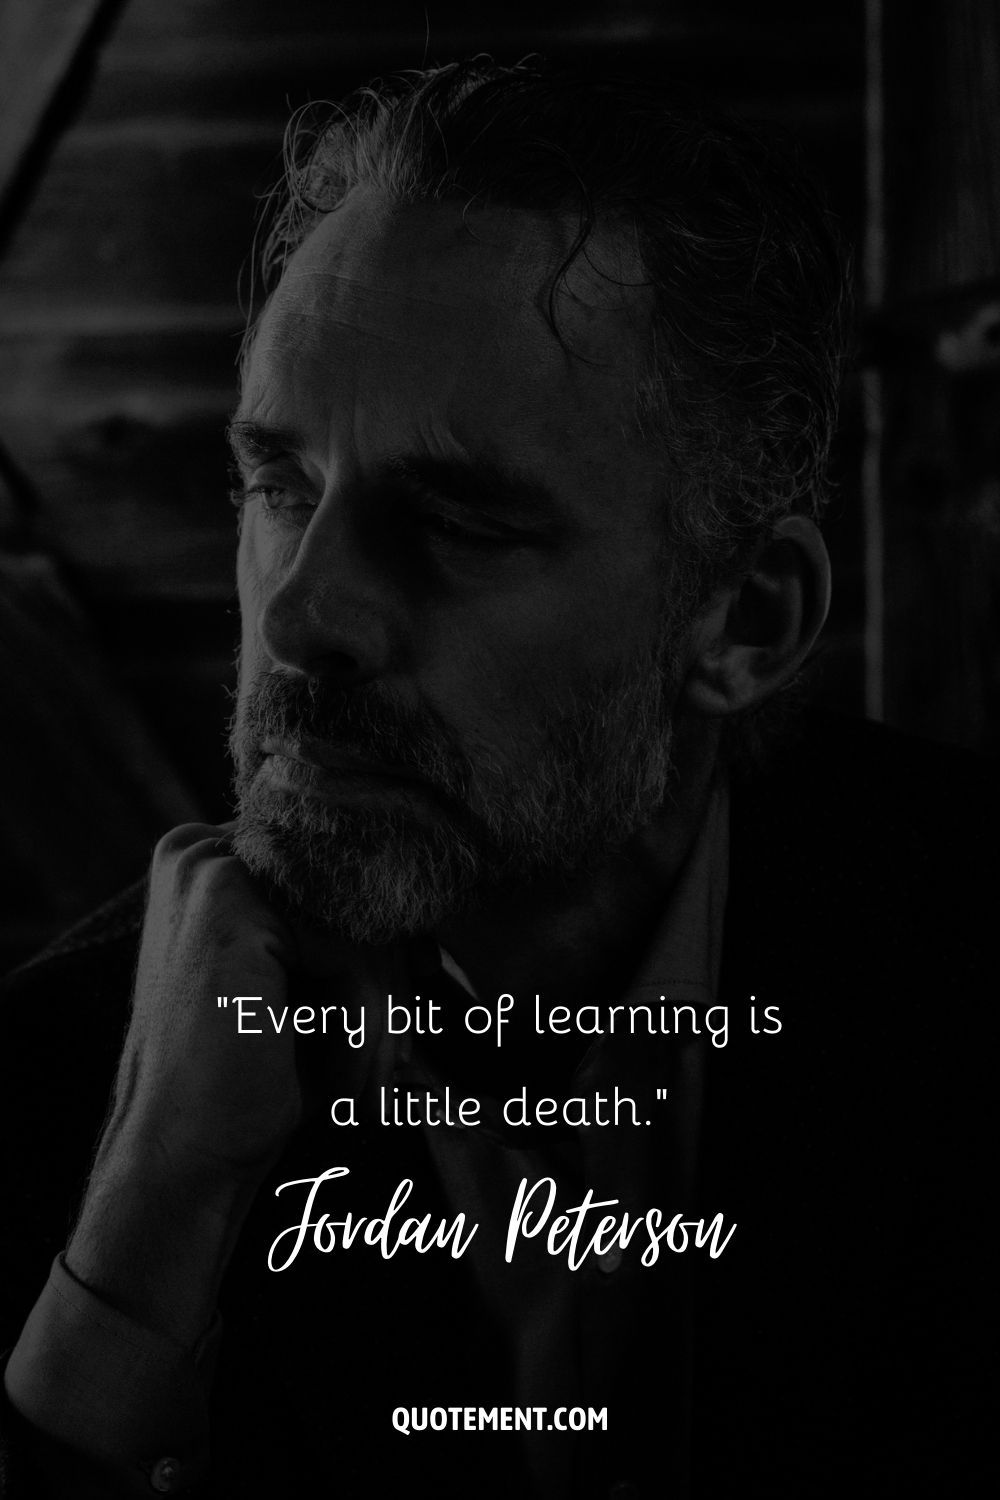 Every bit of learning is a little death